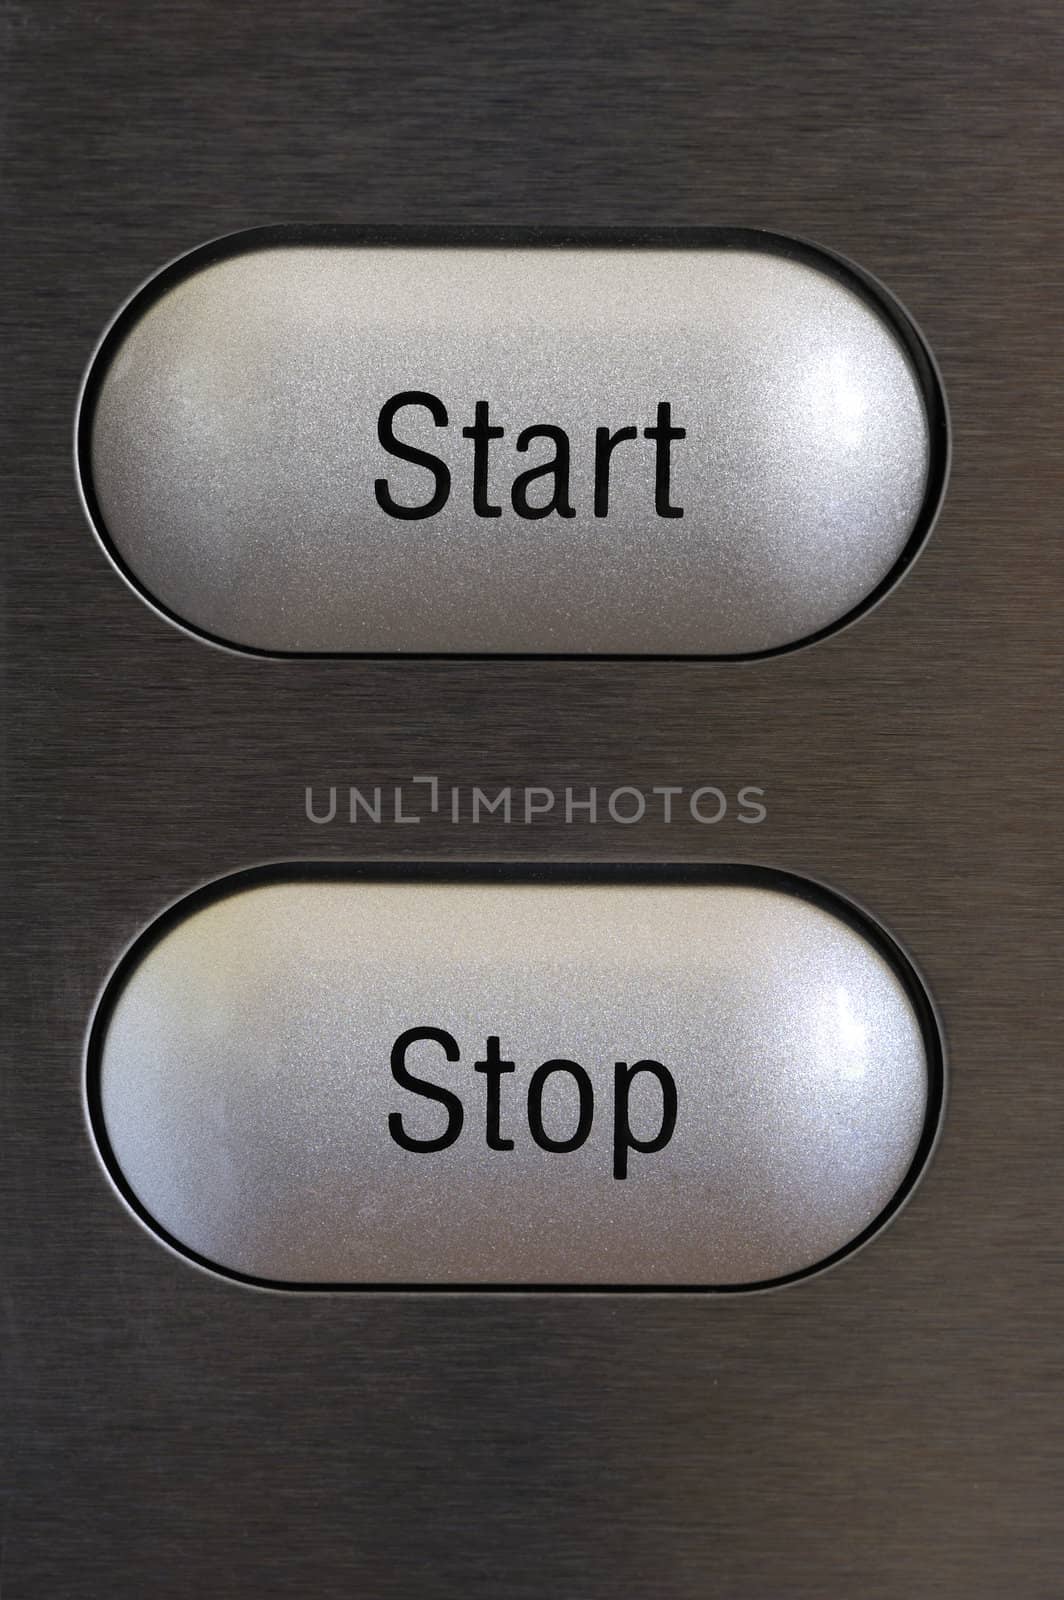 Stop and start buttons by Bateleur